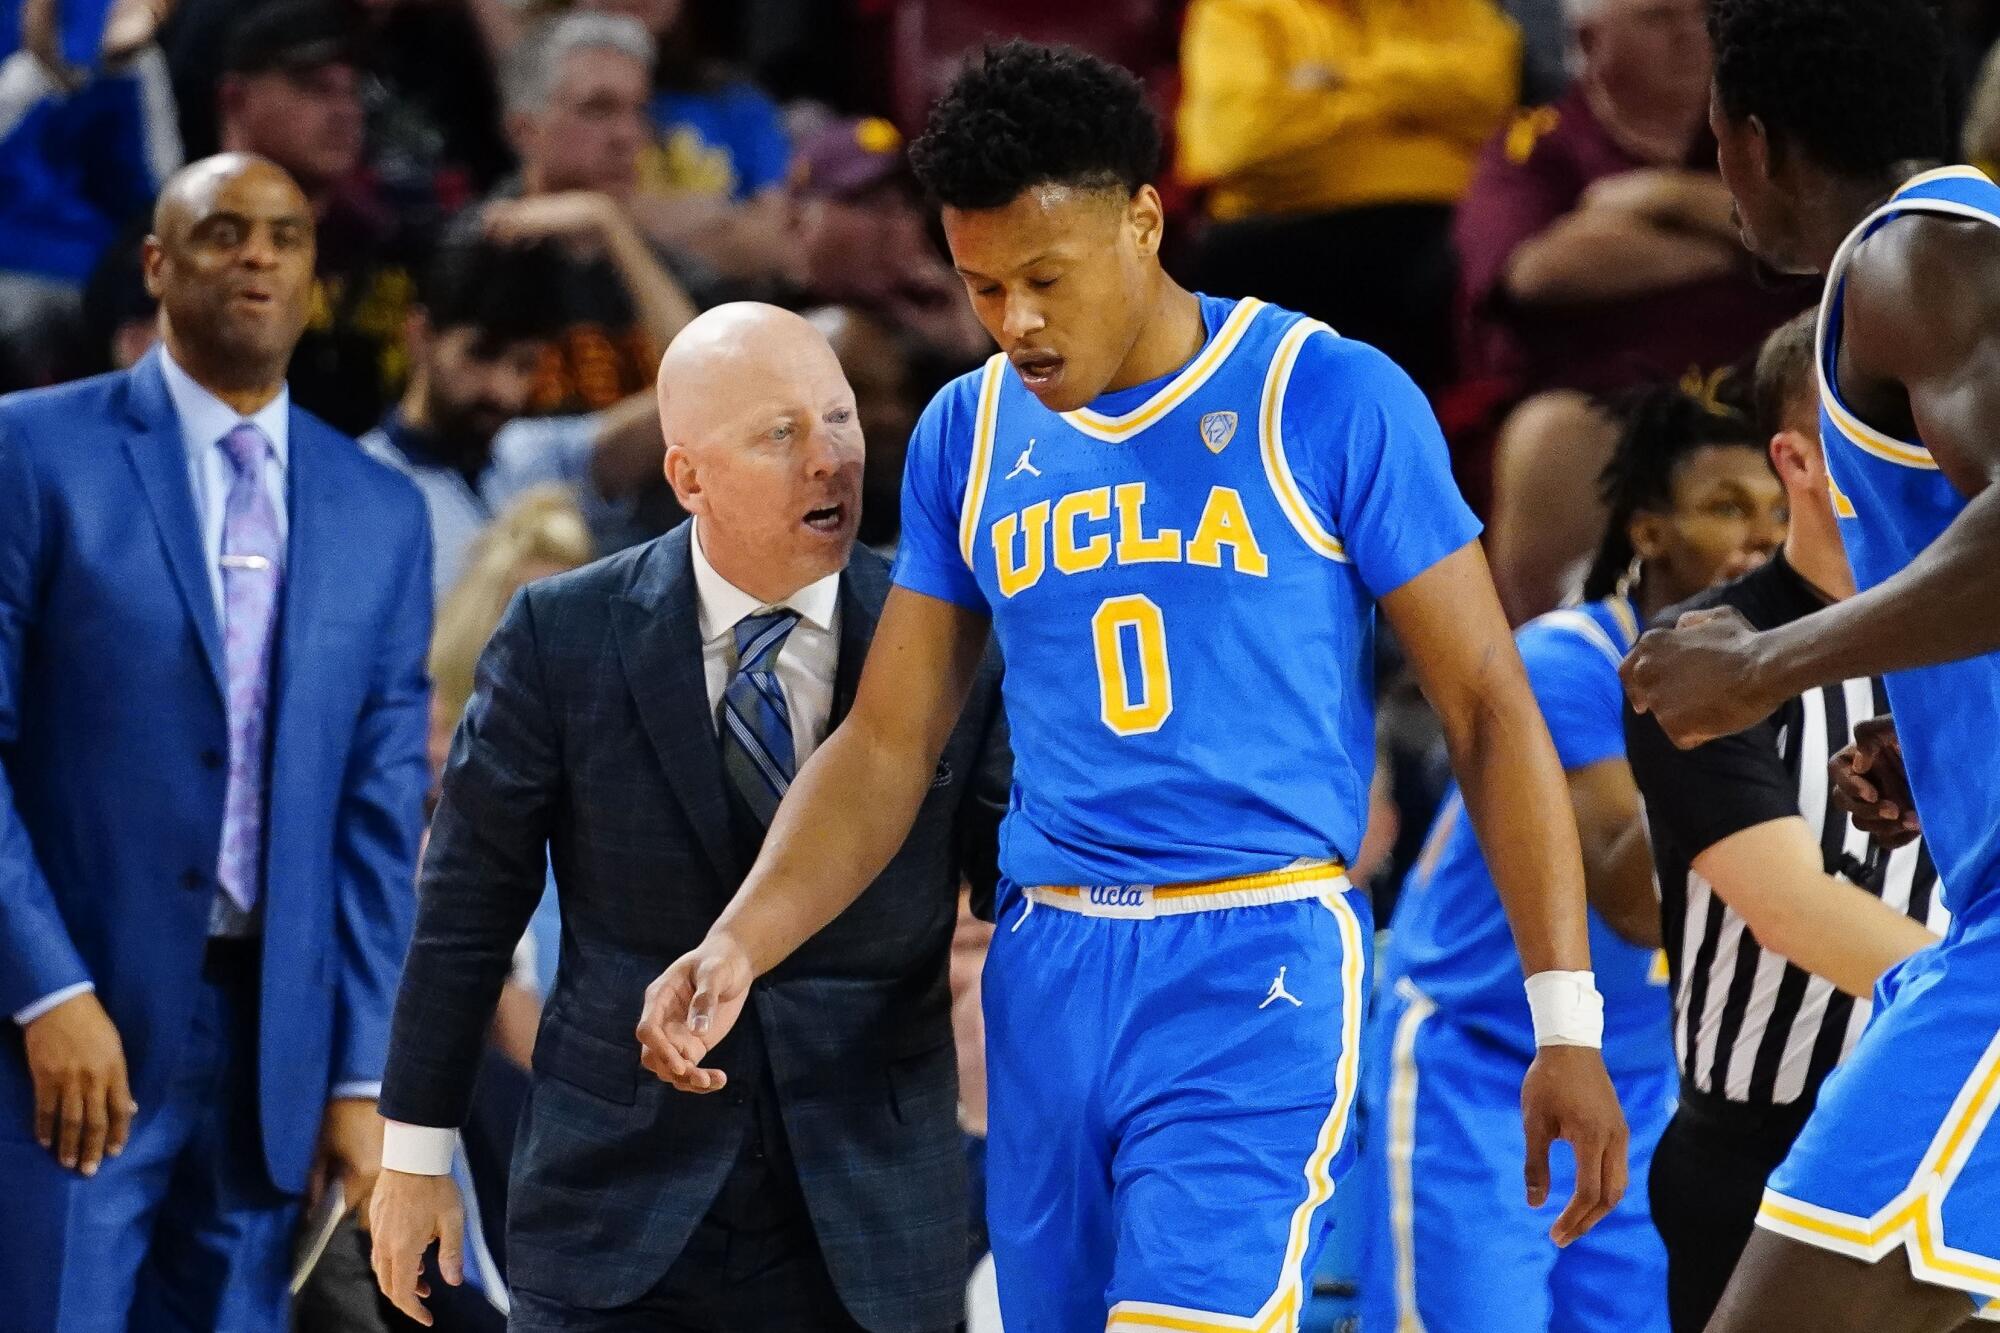 UCLA coach Mick Cronin stands on the sideline and gives Jaylen Clark instructions as the player walks by 